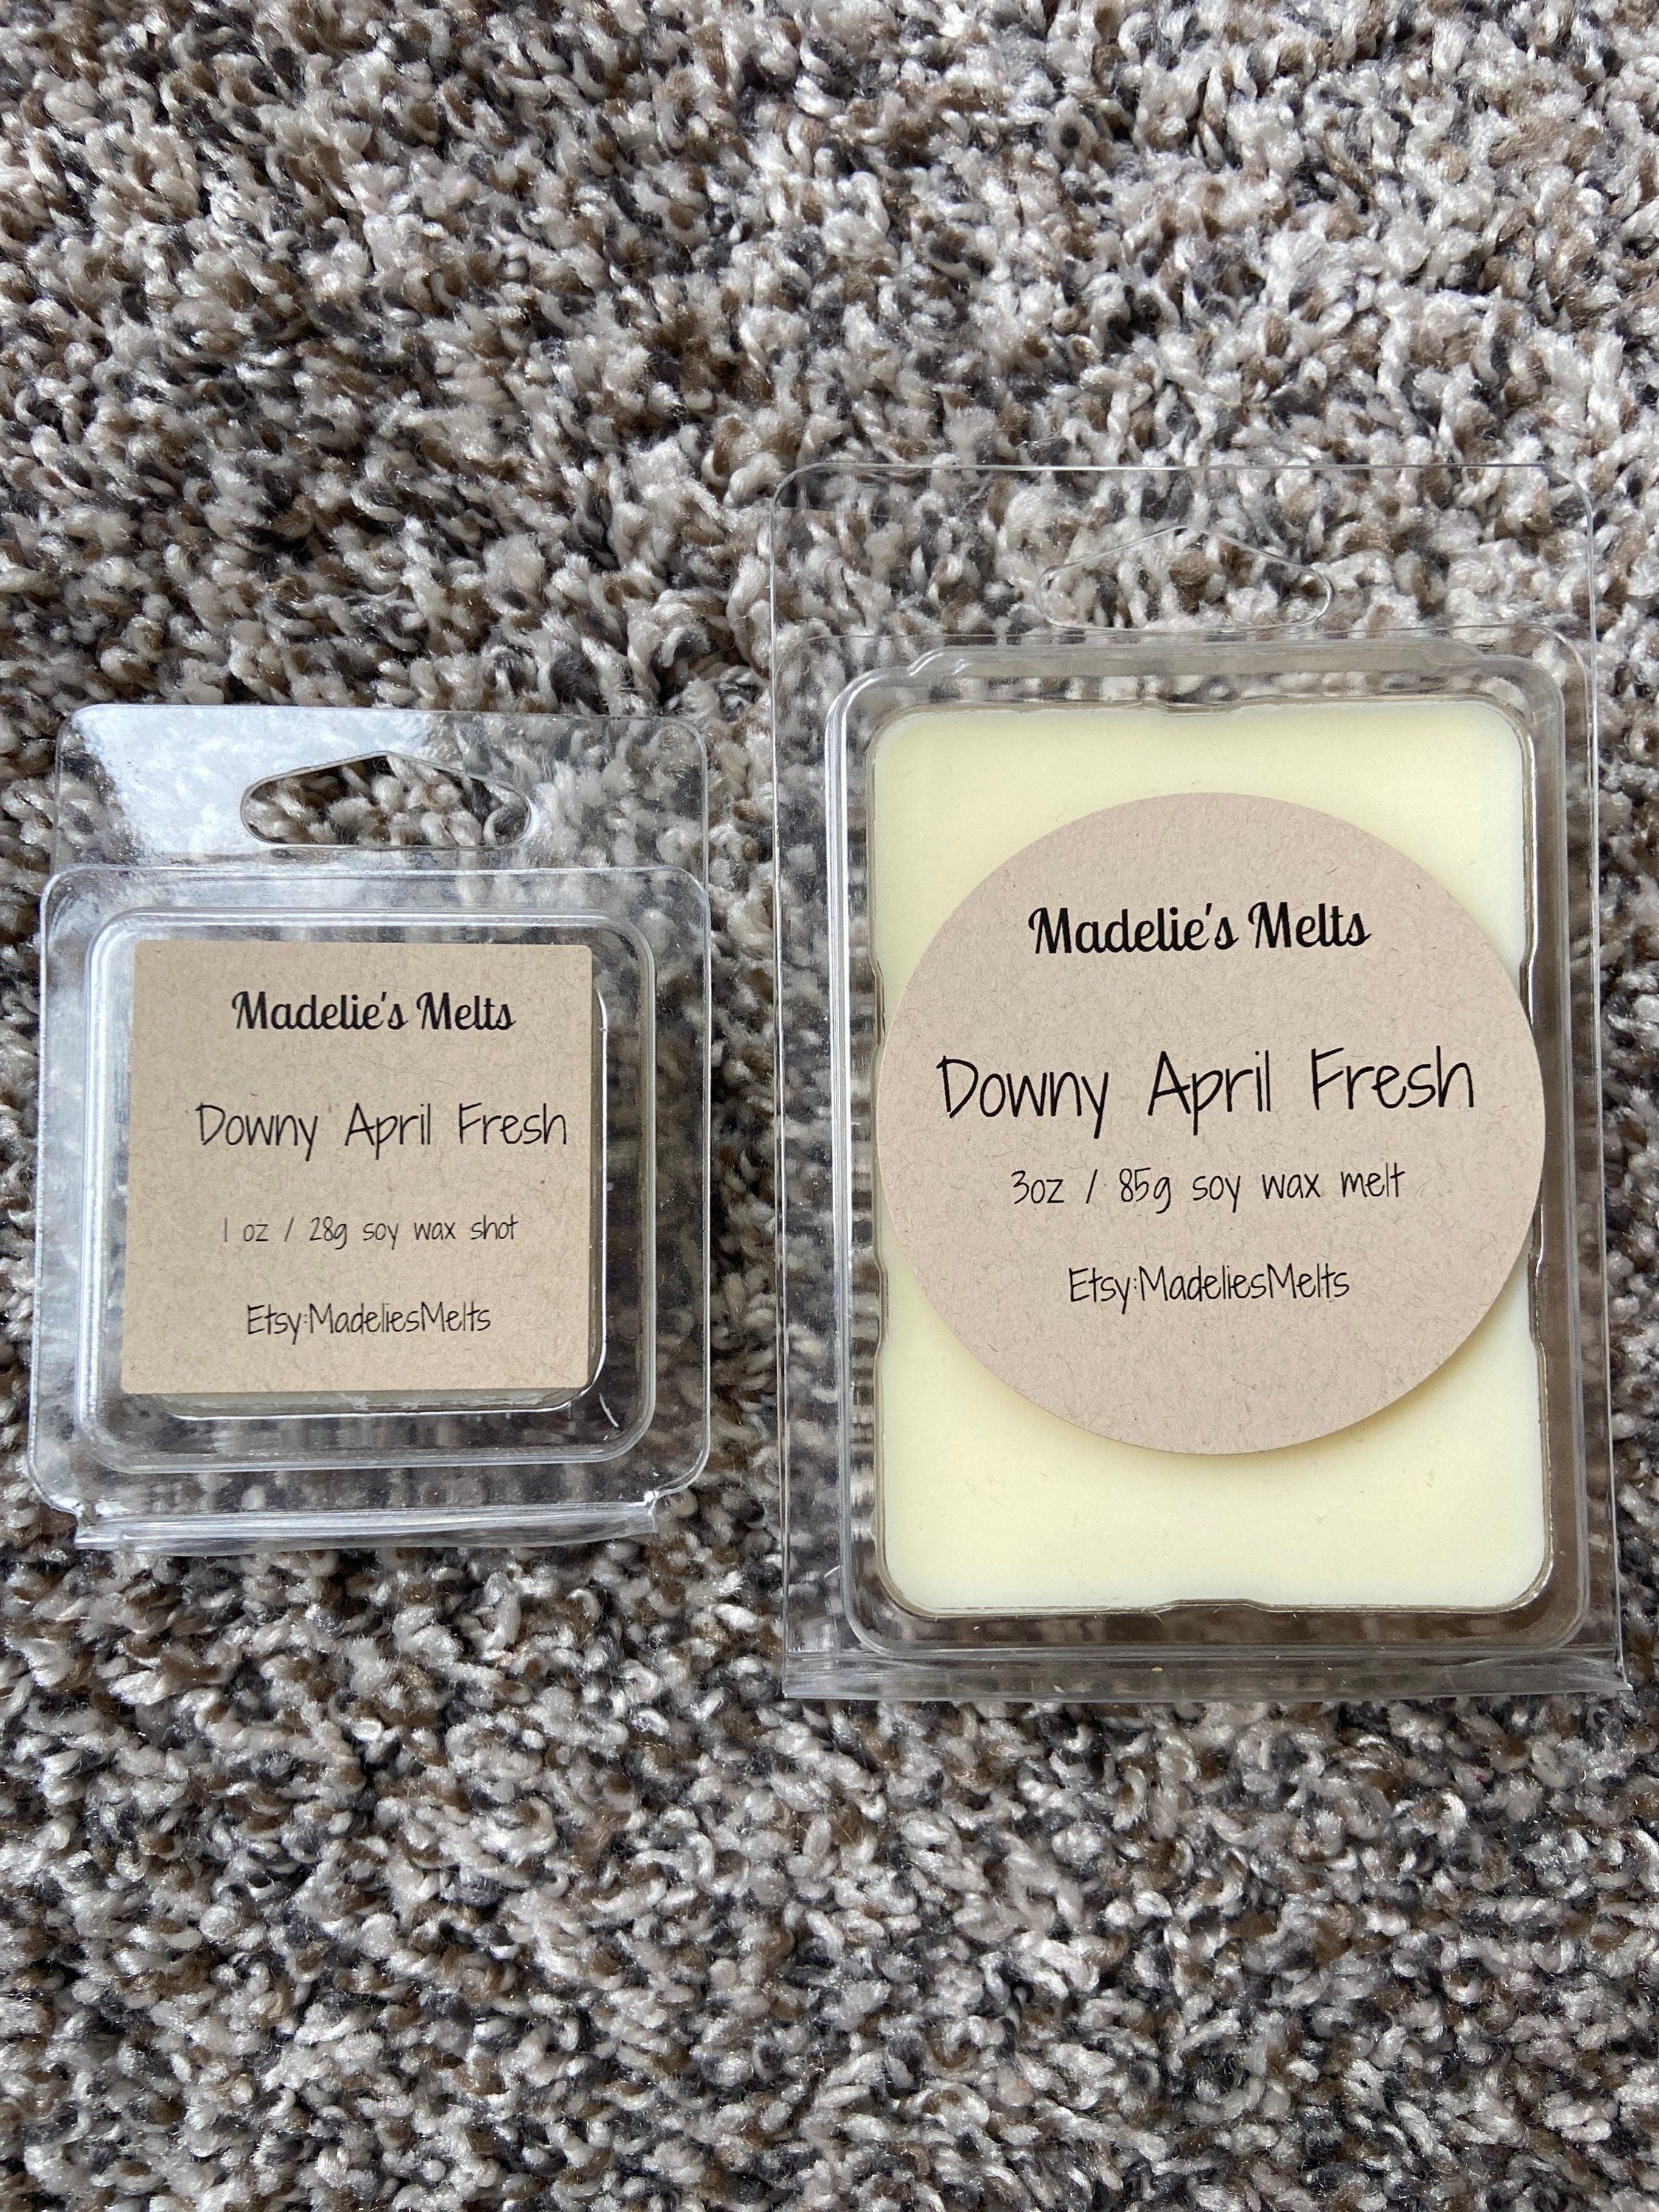 Downys April Fresh TYPE Scented Handmade Wax Melt Snap Bars Strong Scented  2.6 Oz. Soy Wax Melts Fresh Fragrance 